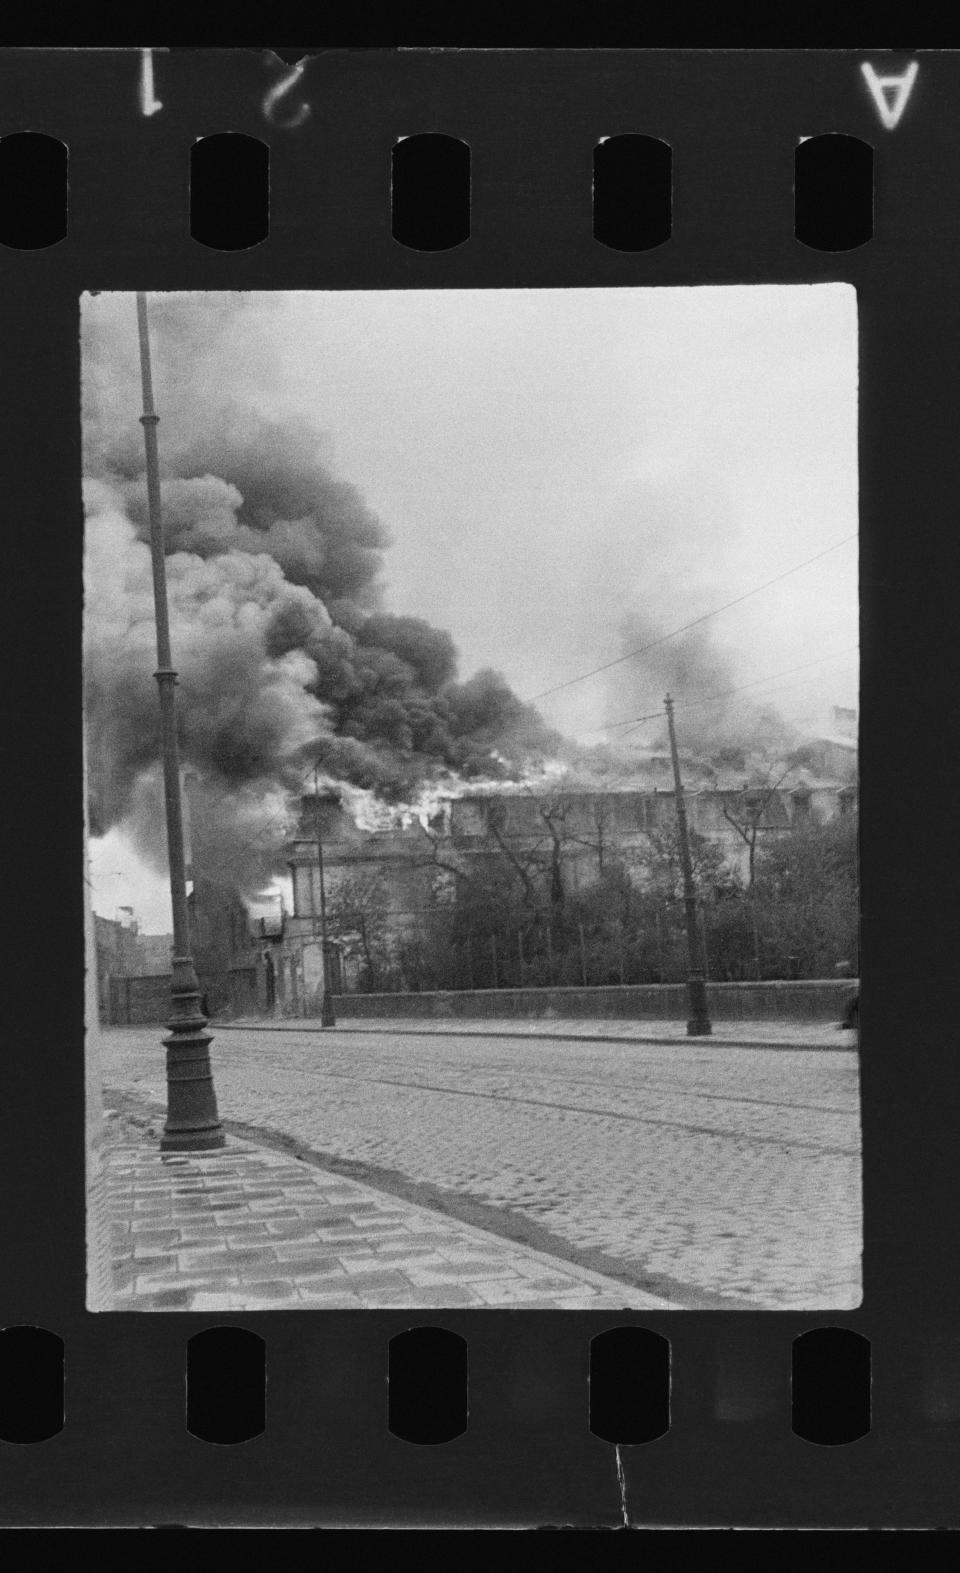 This undated handout negative taken by Polish firefighter Zbigniew Leszek Grzywaczewski negative shows the ghetto of Warsaw during the uprising of 1943, in Warsaw, Poland. On Wednesday, Jan. 18, 2023, Warsaw’s Jewish history museum presented a group of photographs taken in secret during the Warsaw Ghetto Uprising of 1943, some of which have never been seen before, that were recently discovered in a family collection. (Z. L. Grzywaczewski/courtesy of Maciej Grzywaczewski/POLIN Museum via AP)